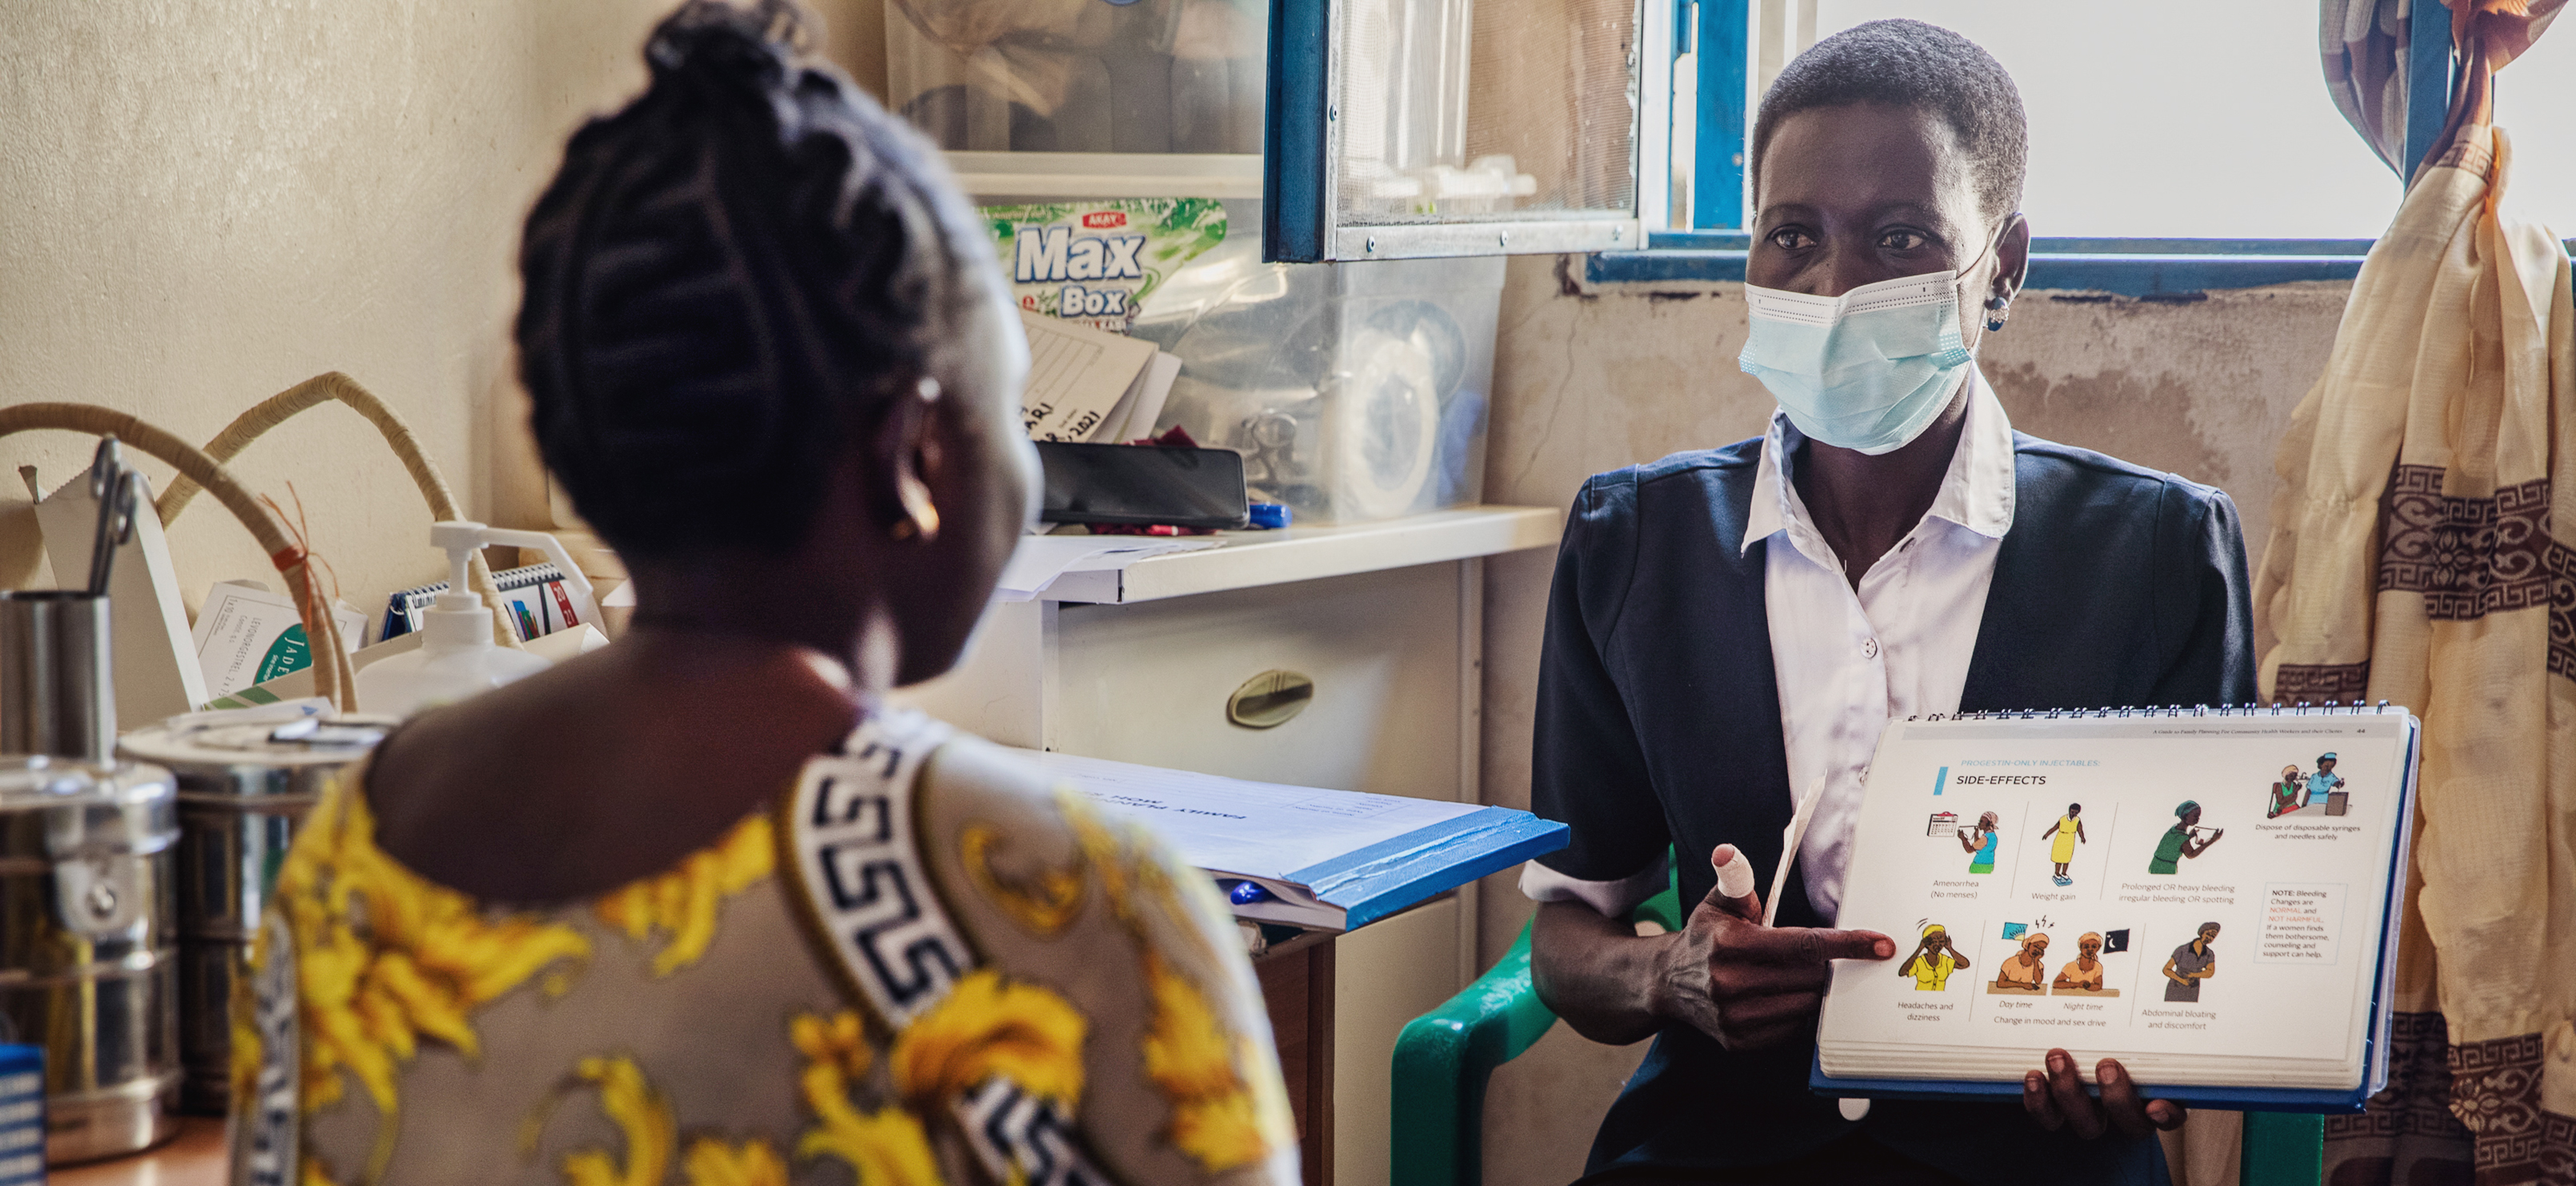 A South Sudanese health advocate explains health information with a chart to a patient